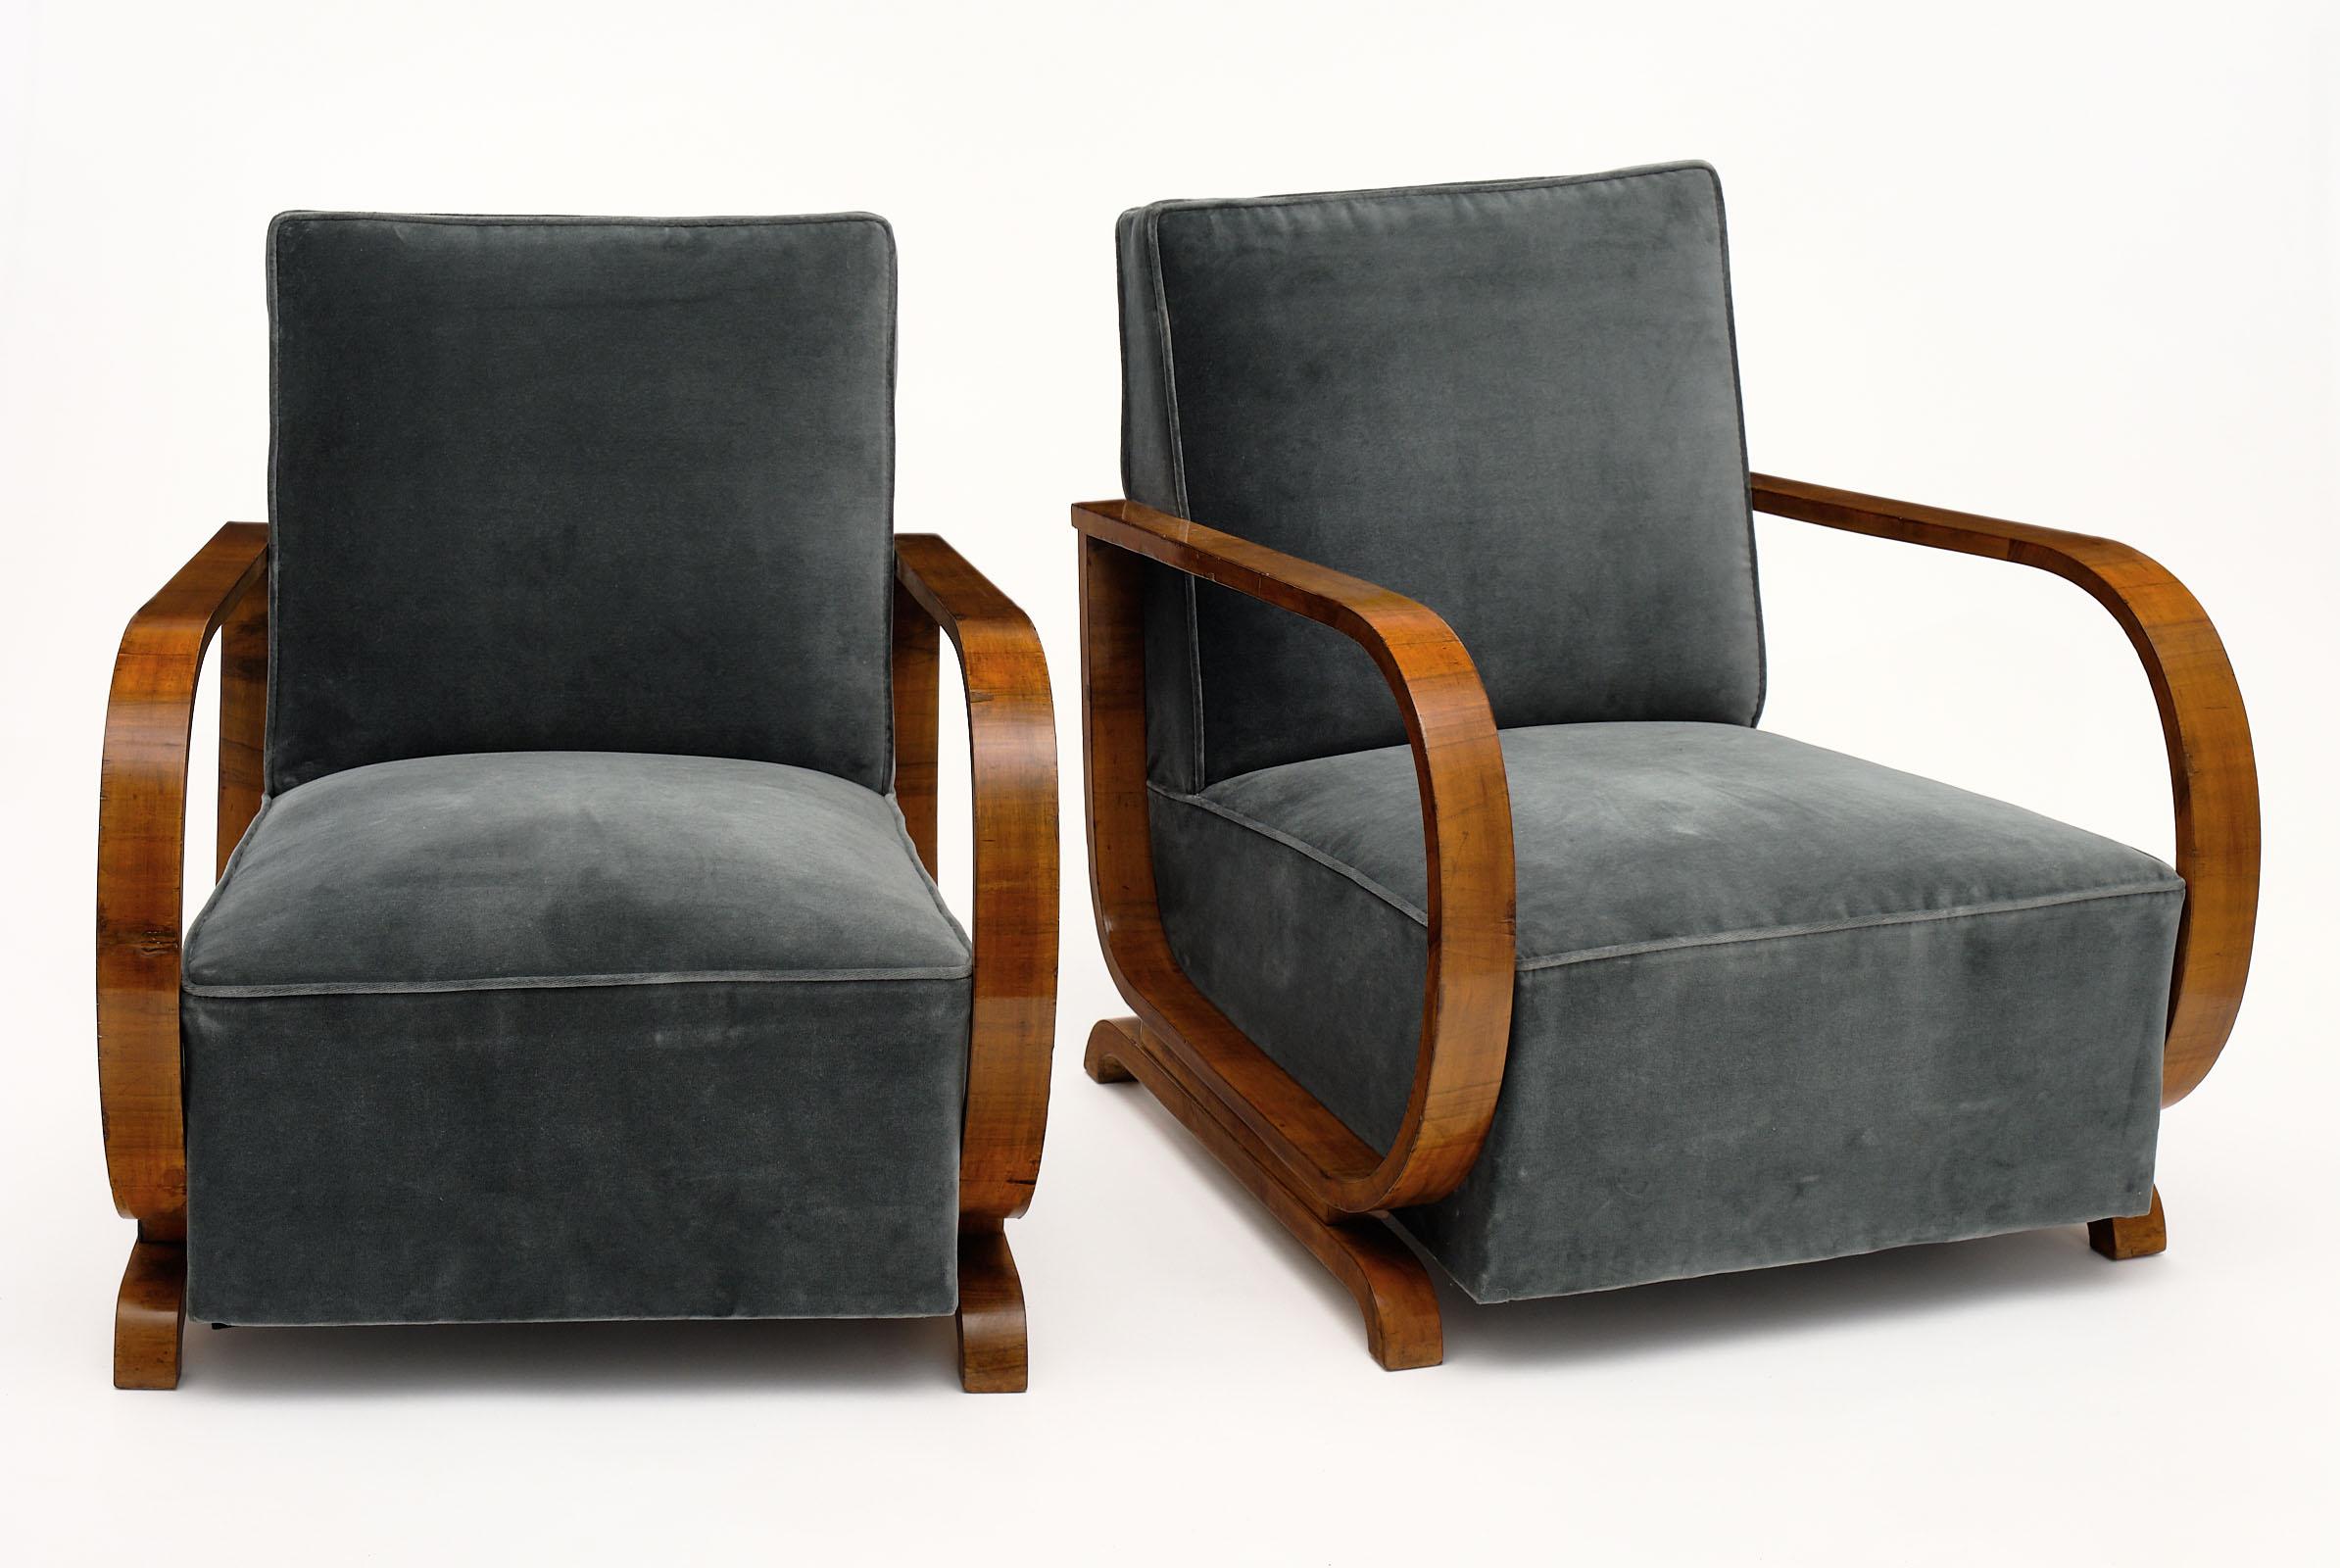 A pair of Art Deco Austrian armchairs from Vienna; reupholstered in a new gray velvet blend. The frame and curved arms are made of a beautiful figured walnut veneer. We couldn’t resist the comfort and impeccable lines of these.